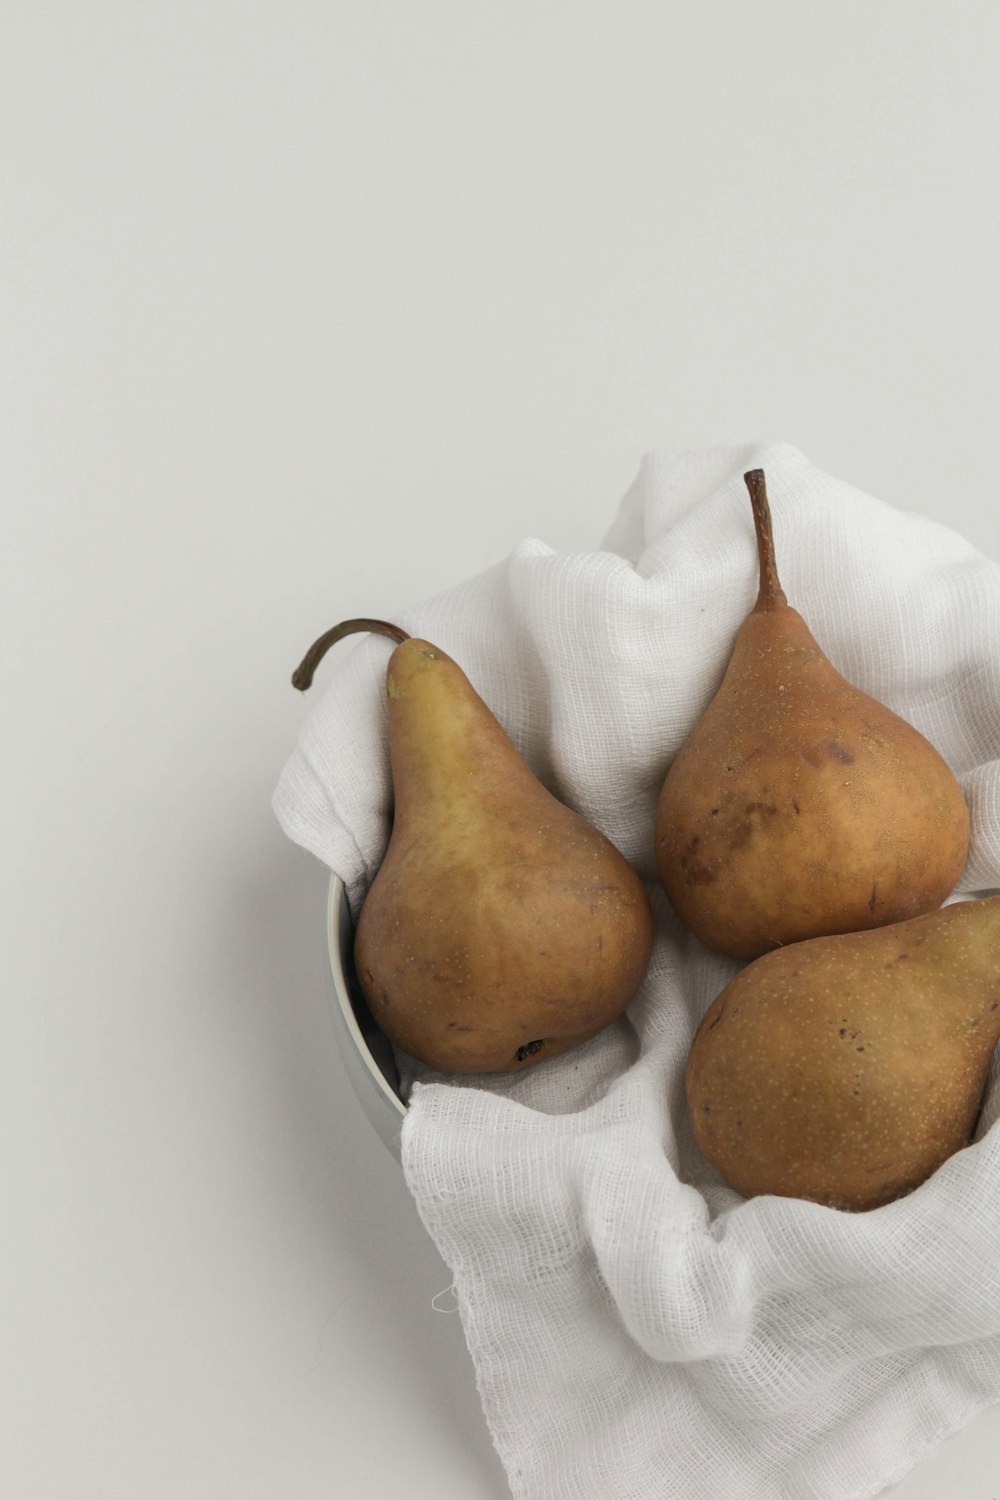 four pears in a bowl on a white cloth